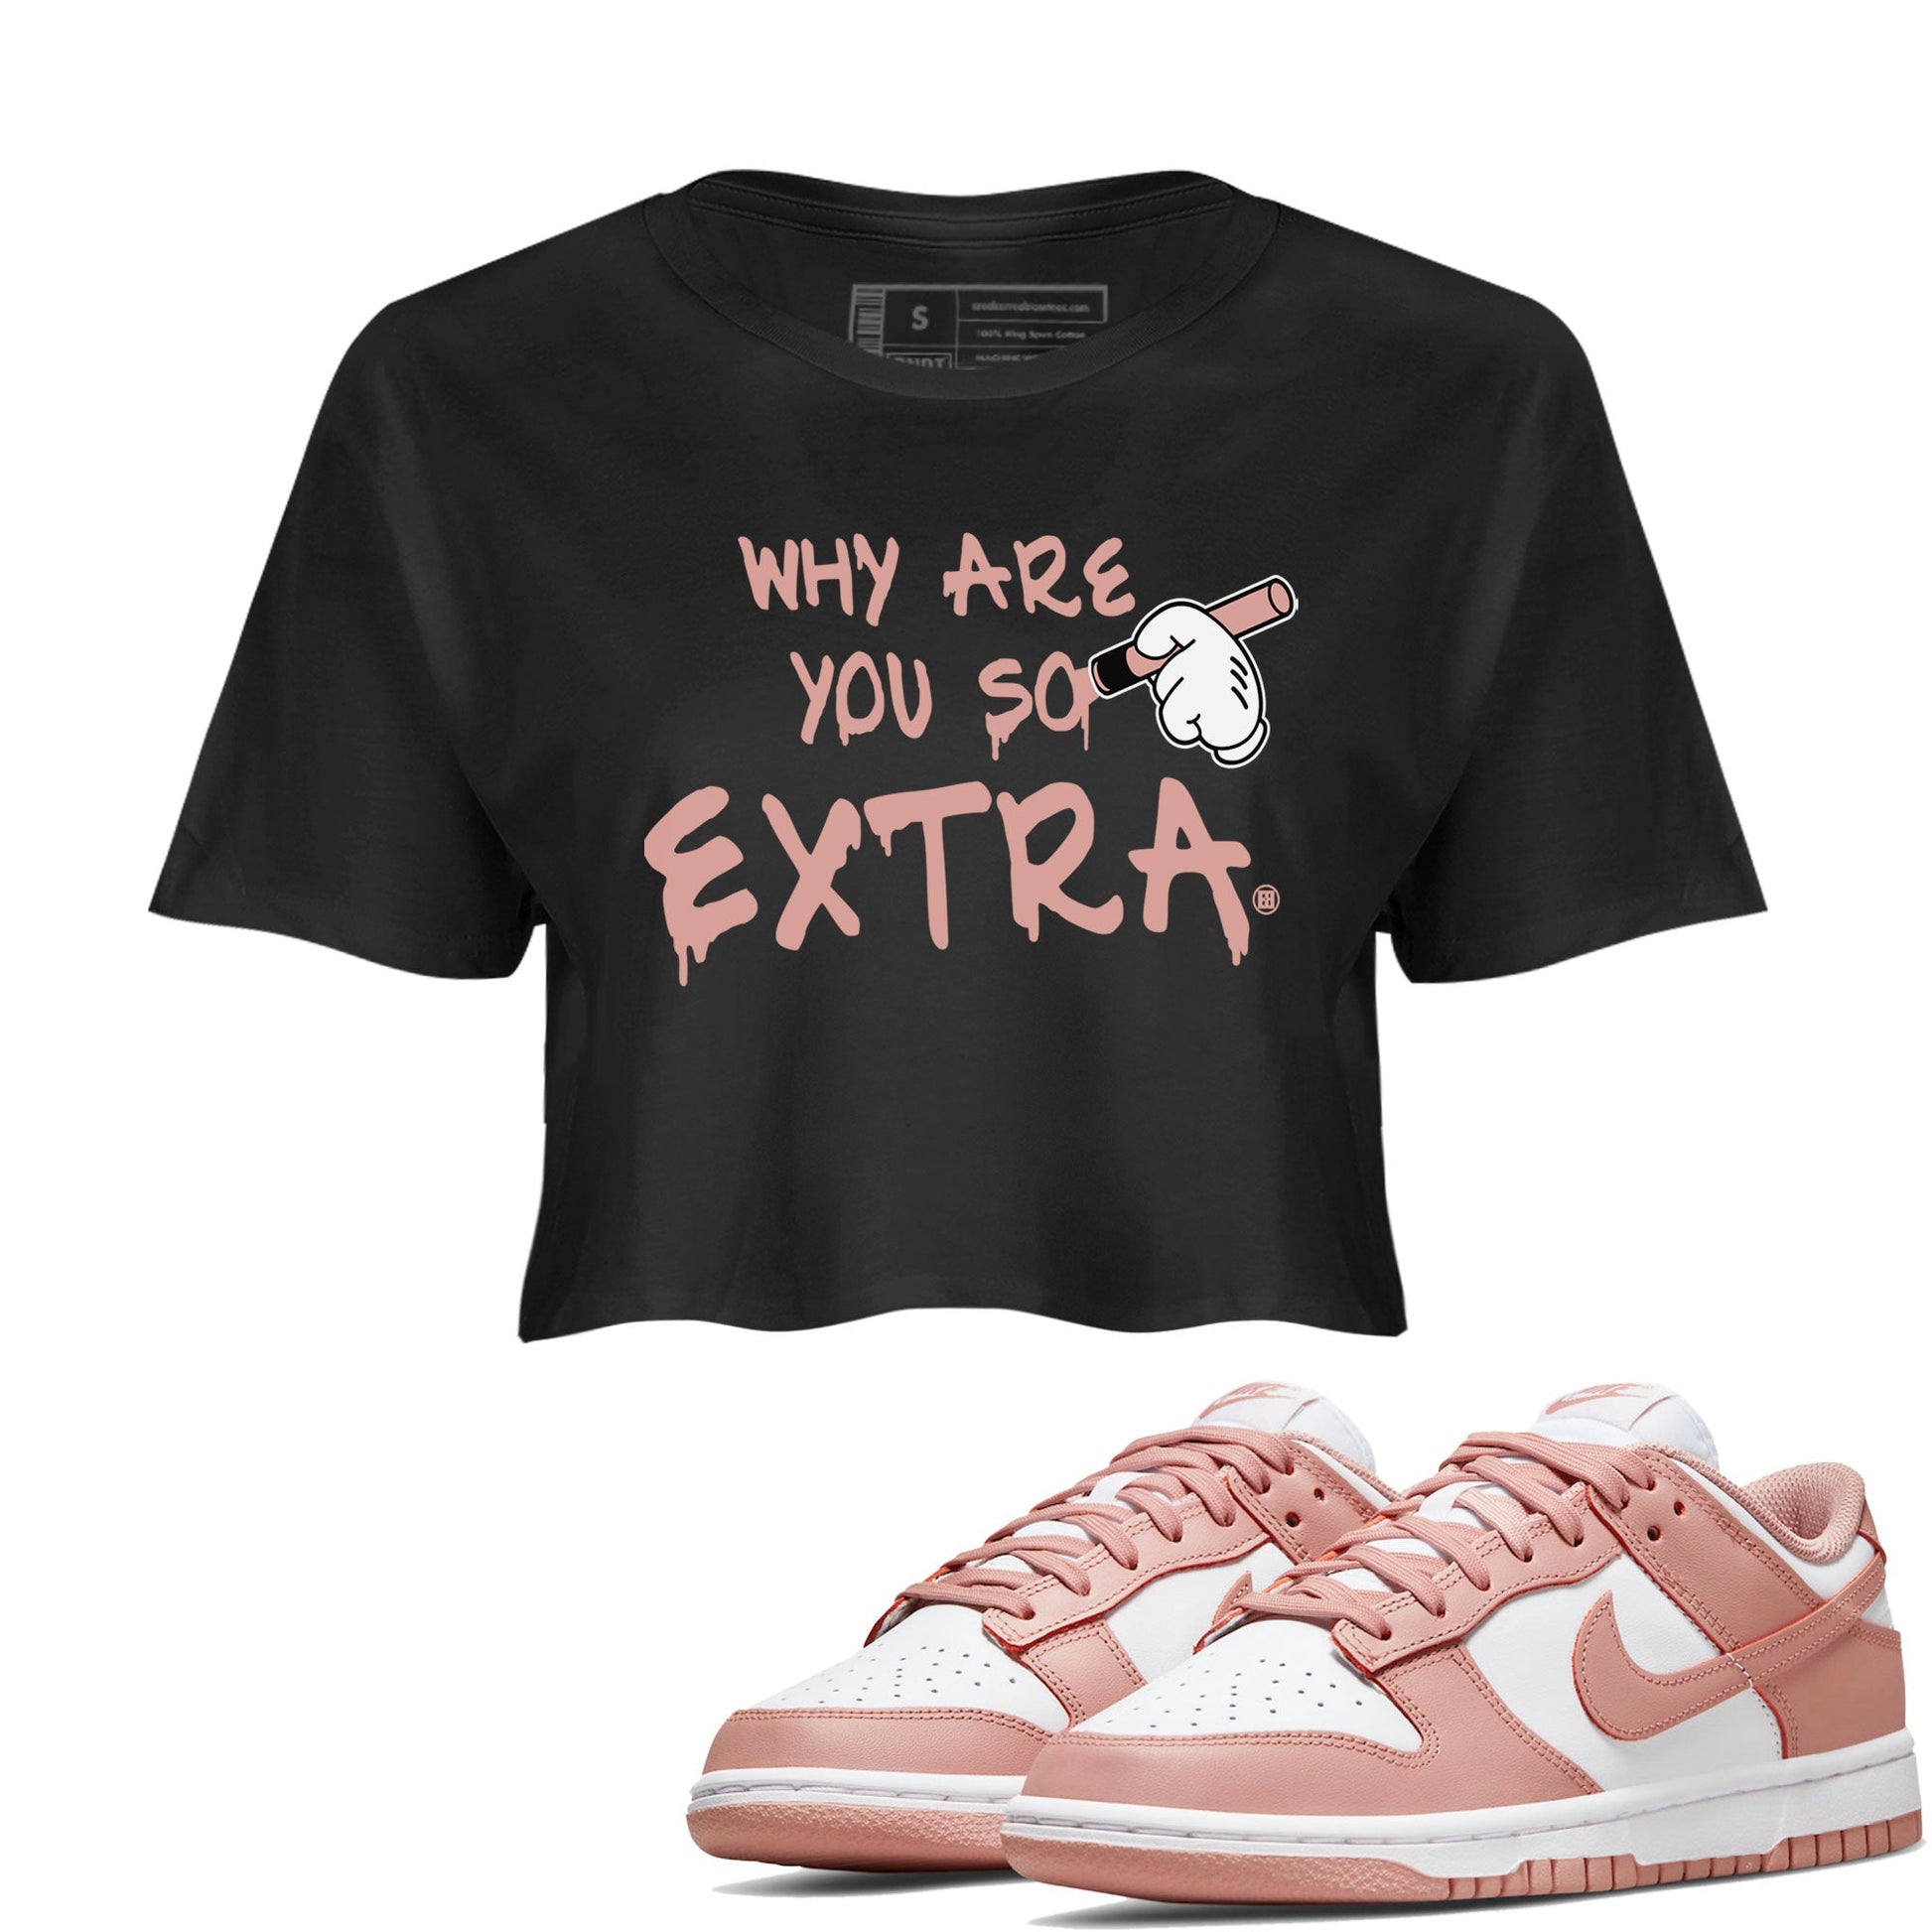 Dunks Low Rose Whisper shirt to match jordans Why Are You So Extra sneaker tees Dunk Rose Whisper SNRT Sneaker Release Tees Black 1 Crop T-Shirt